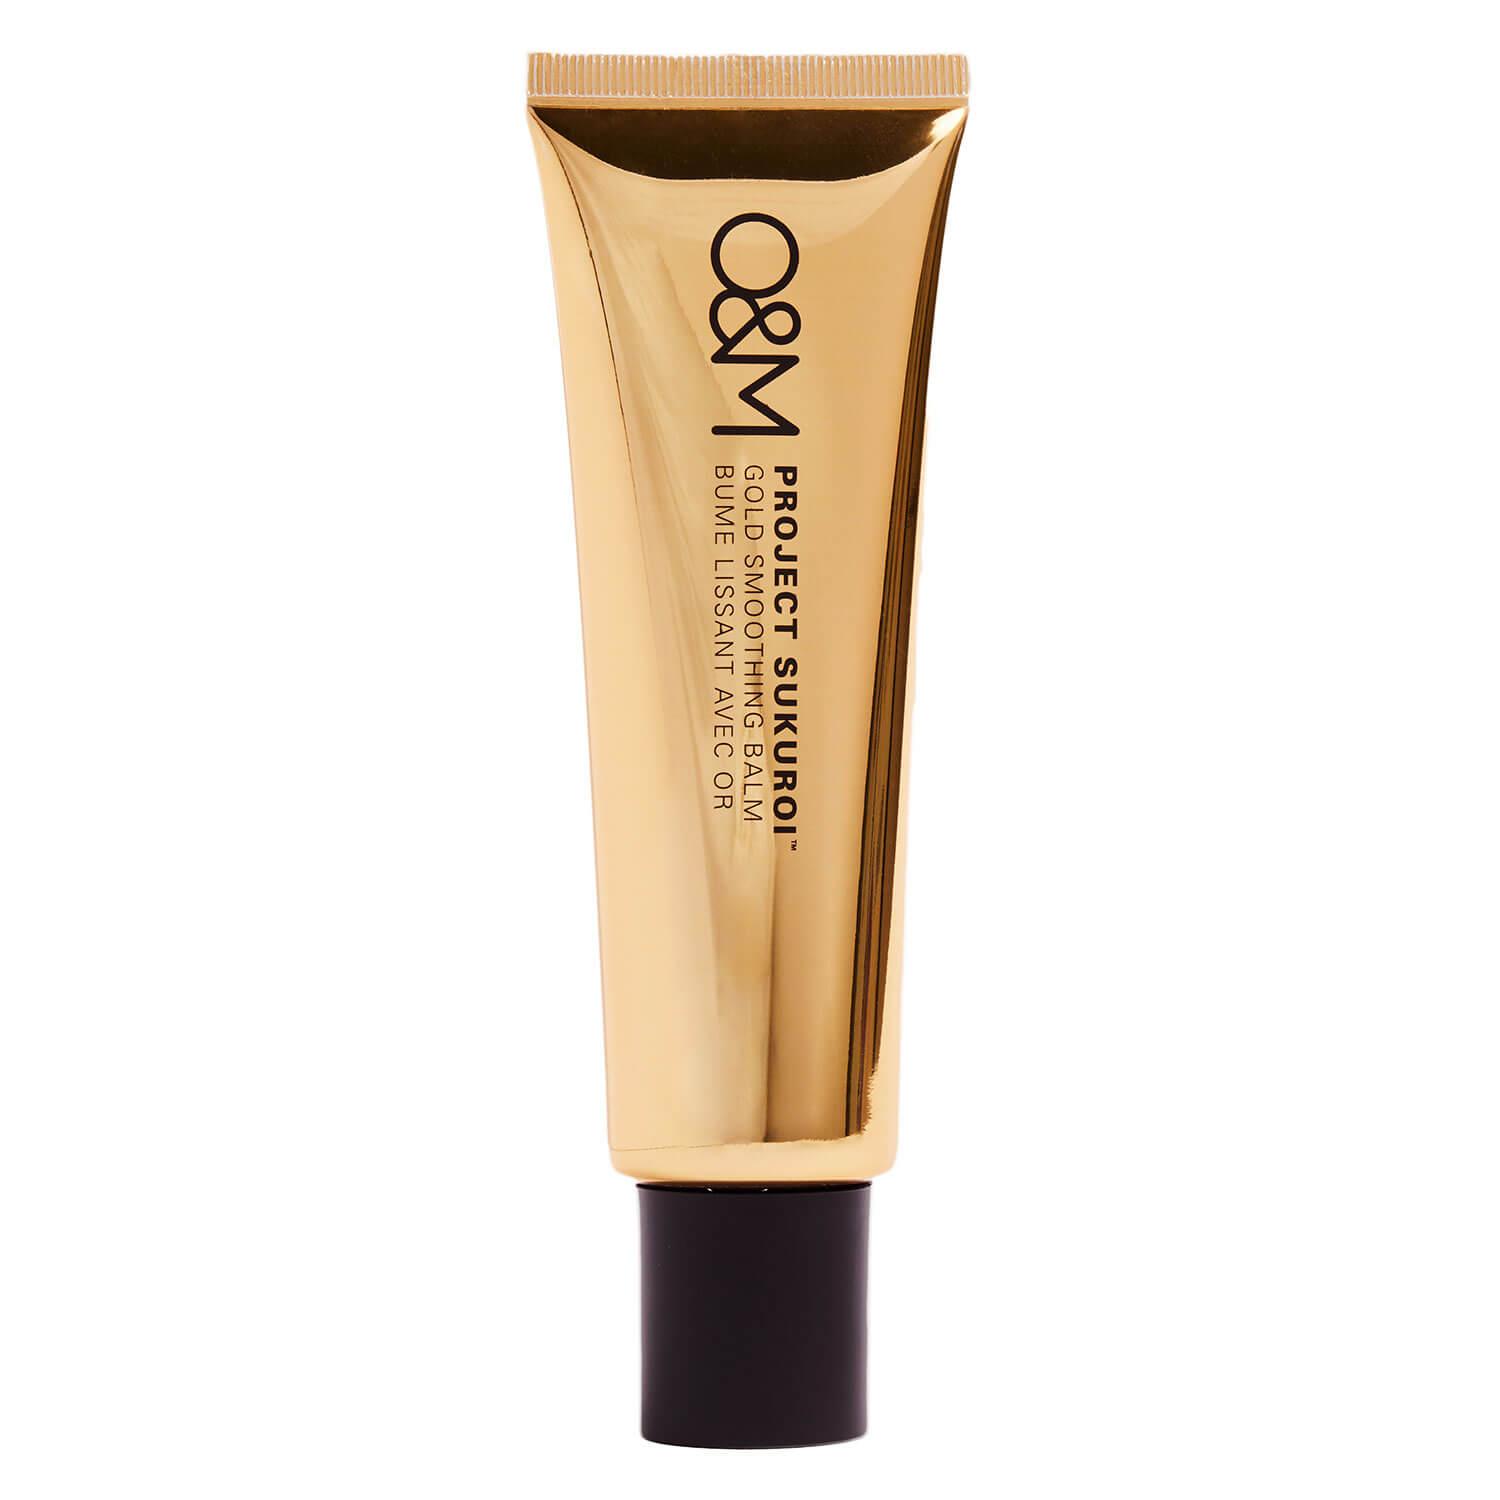 O&M Styling - Project Sukuroi Golden Smoothing Balm